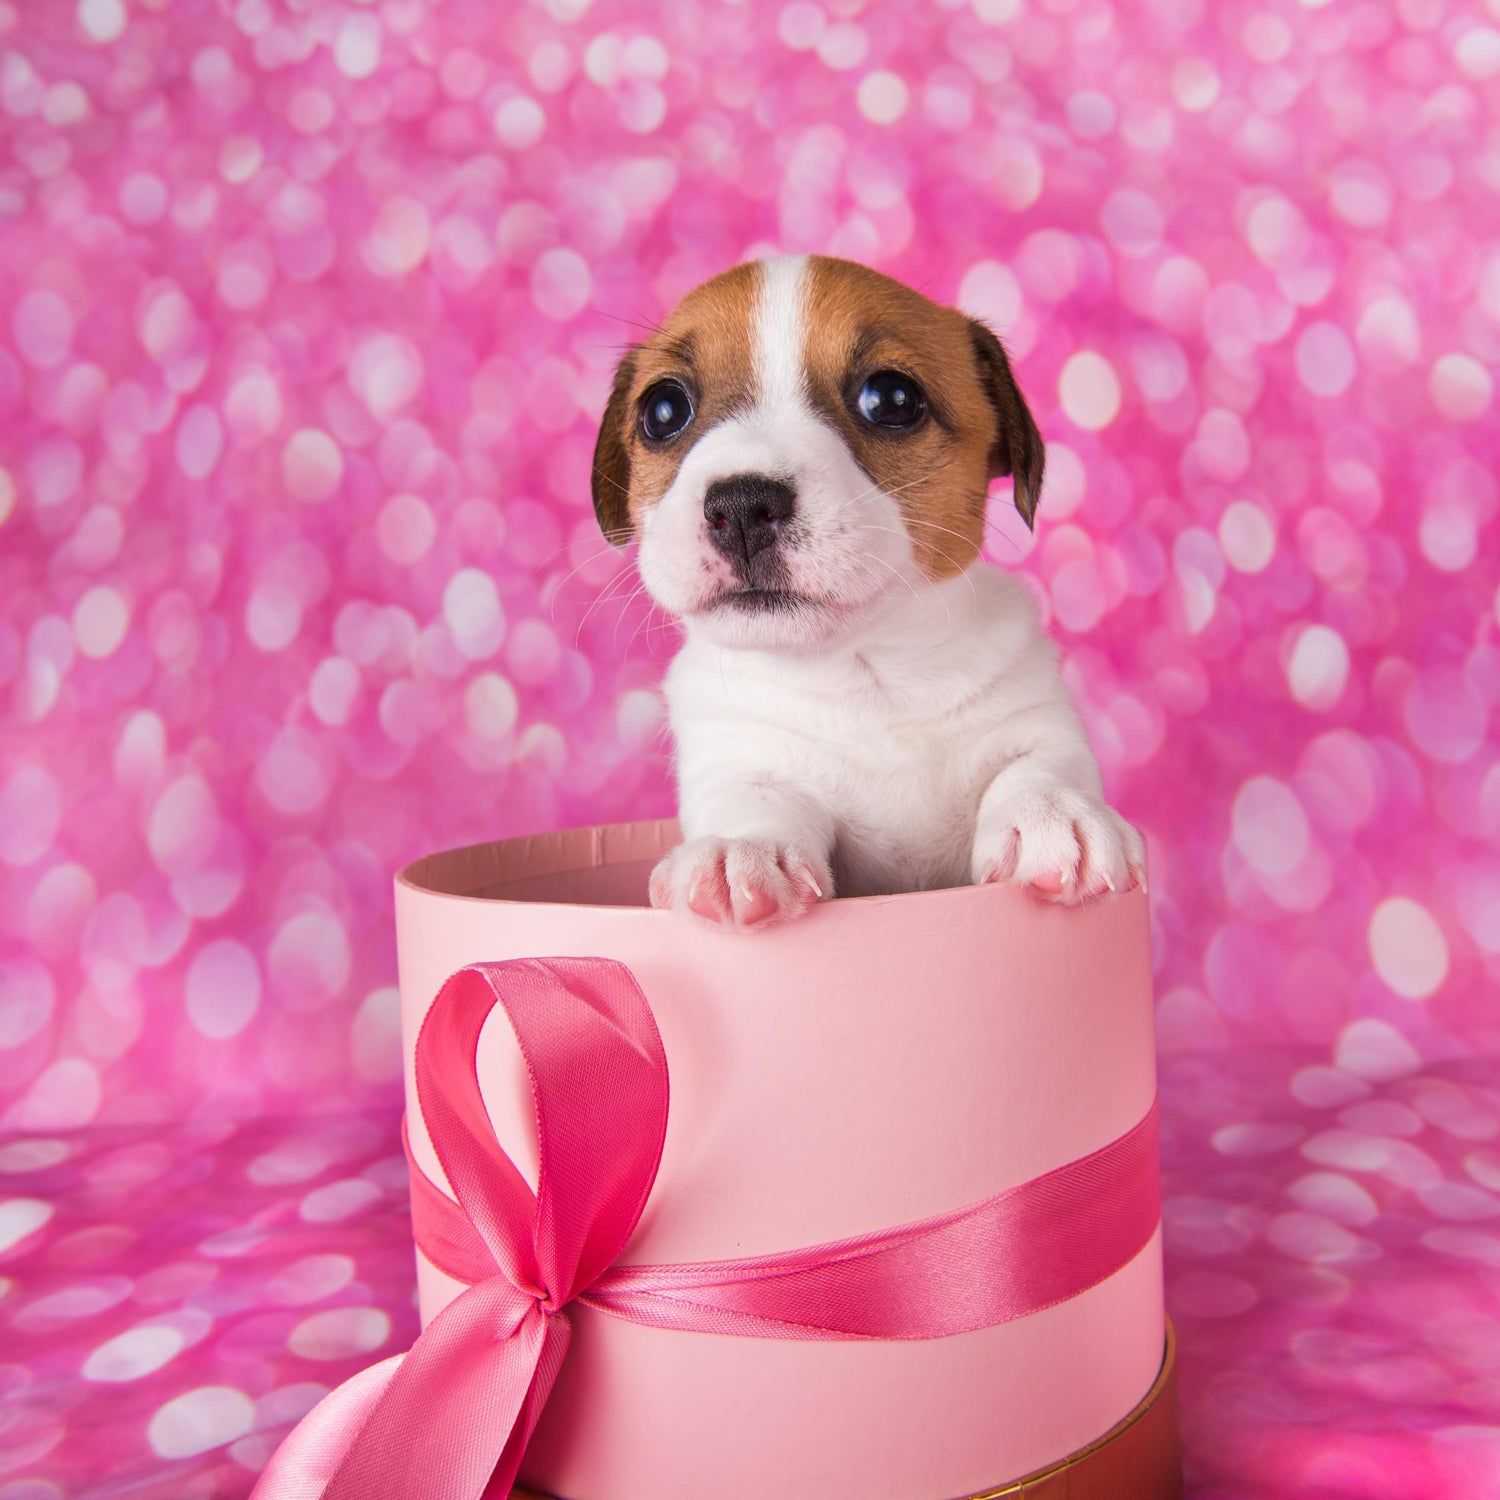 Paws & Presents: Why Dogs Make the Best Holiday Gifts